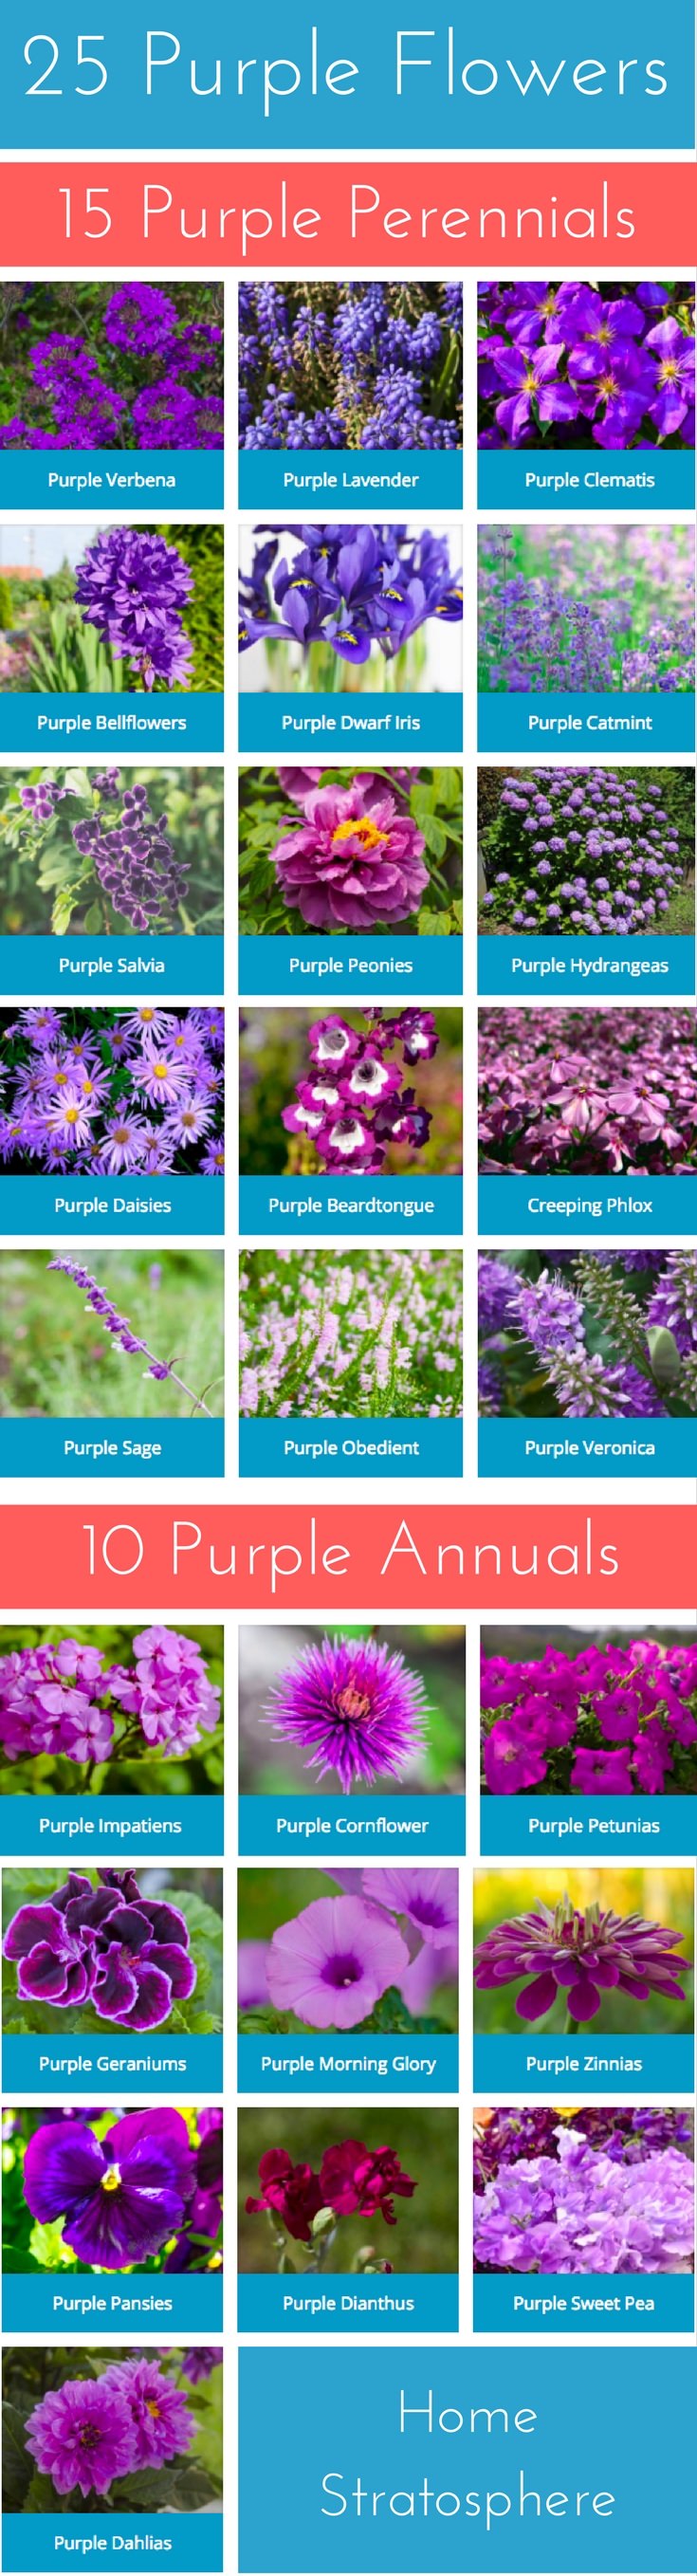 25 Purple Flower Ideas for Your Garden, Pots and Planters